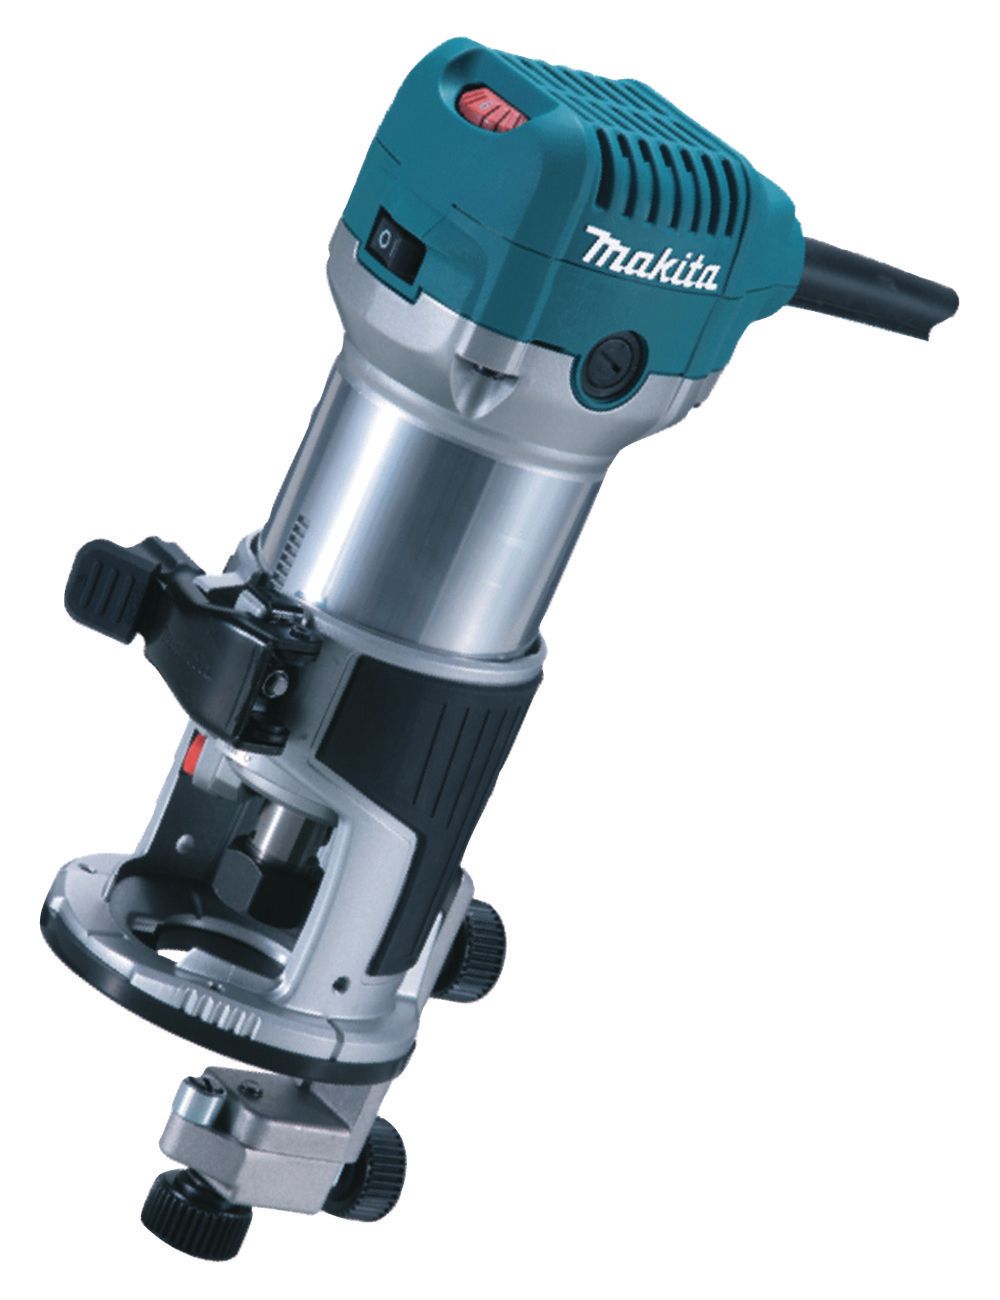 Image of Makita RT0700CX4/1 1/4in Corded Fixed Base Router 110V - 710W